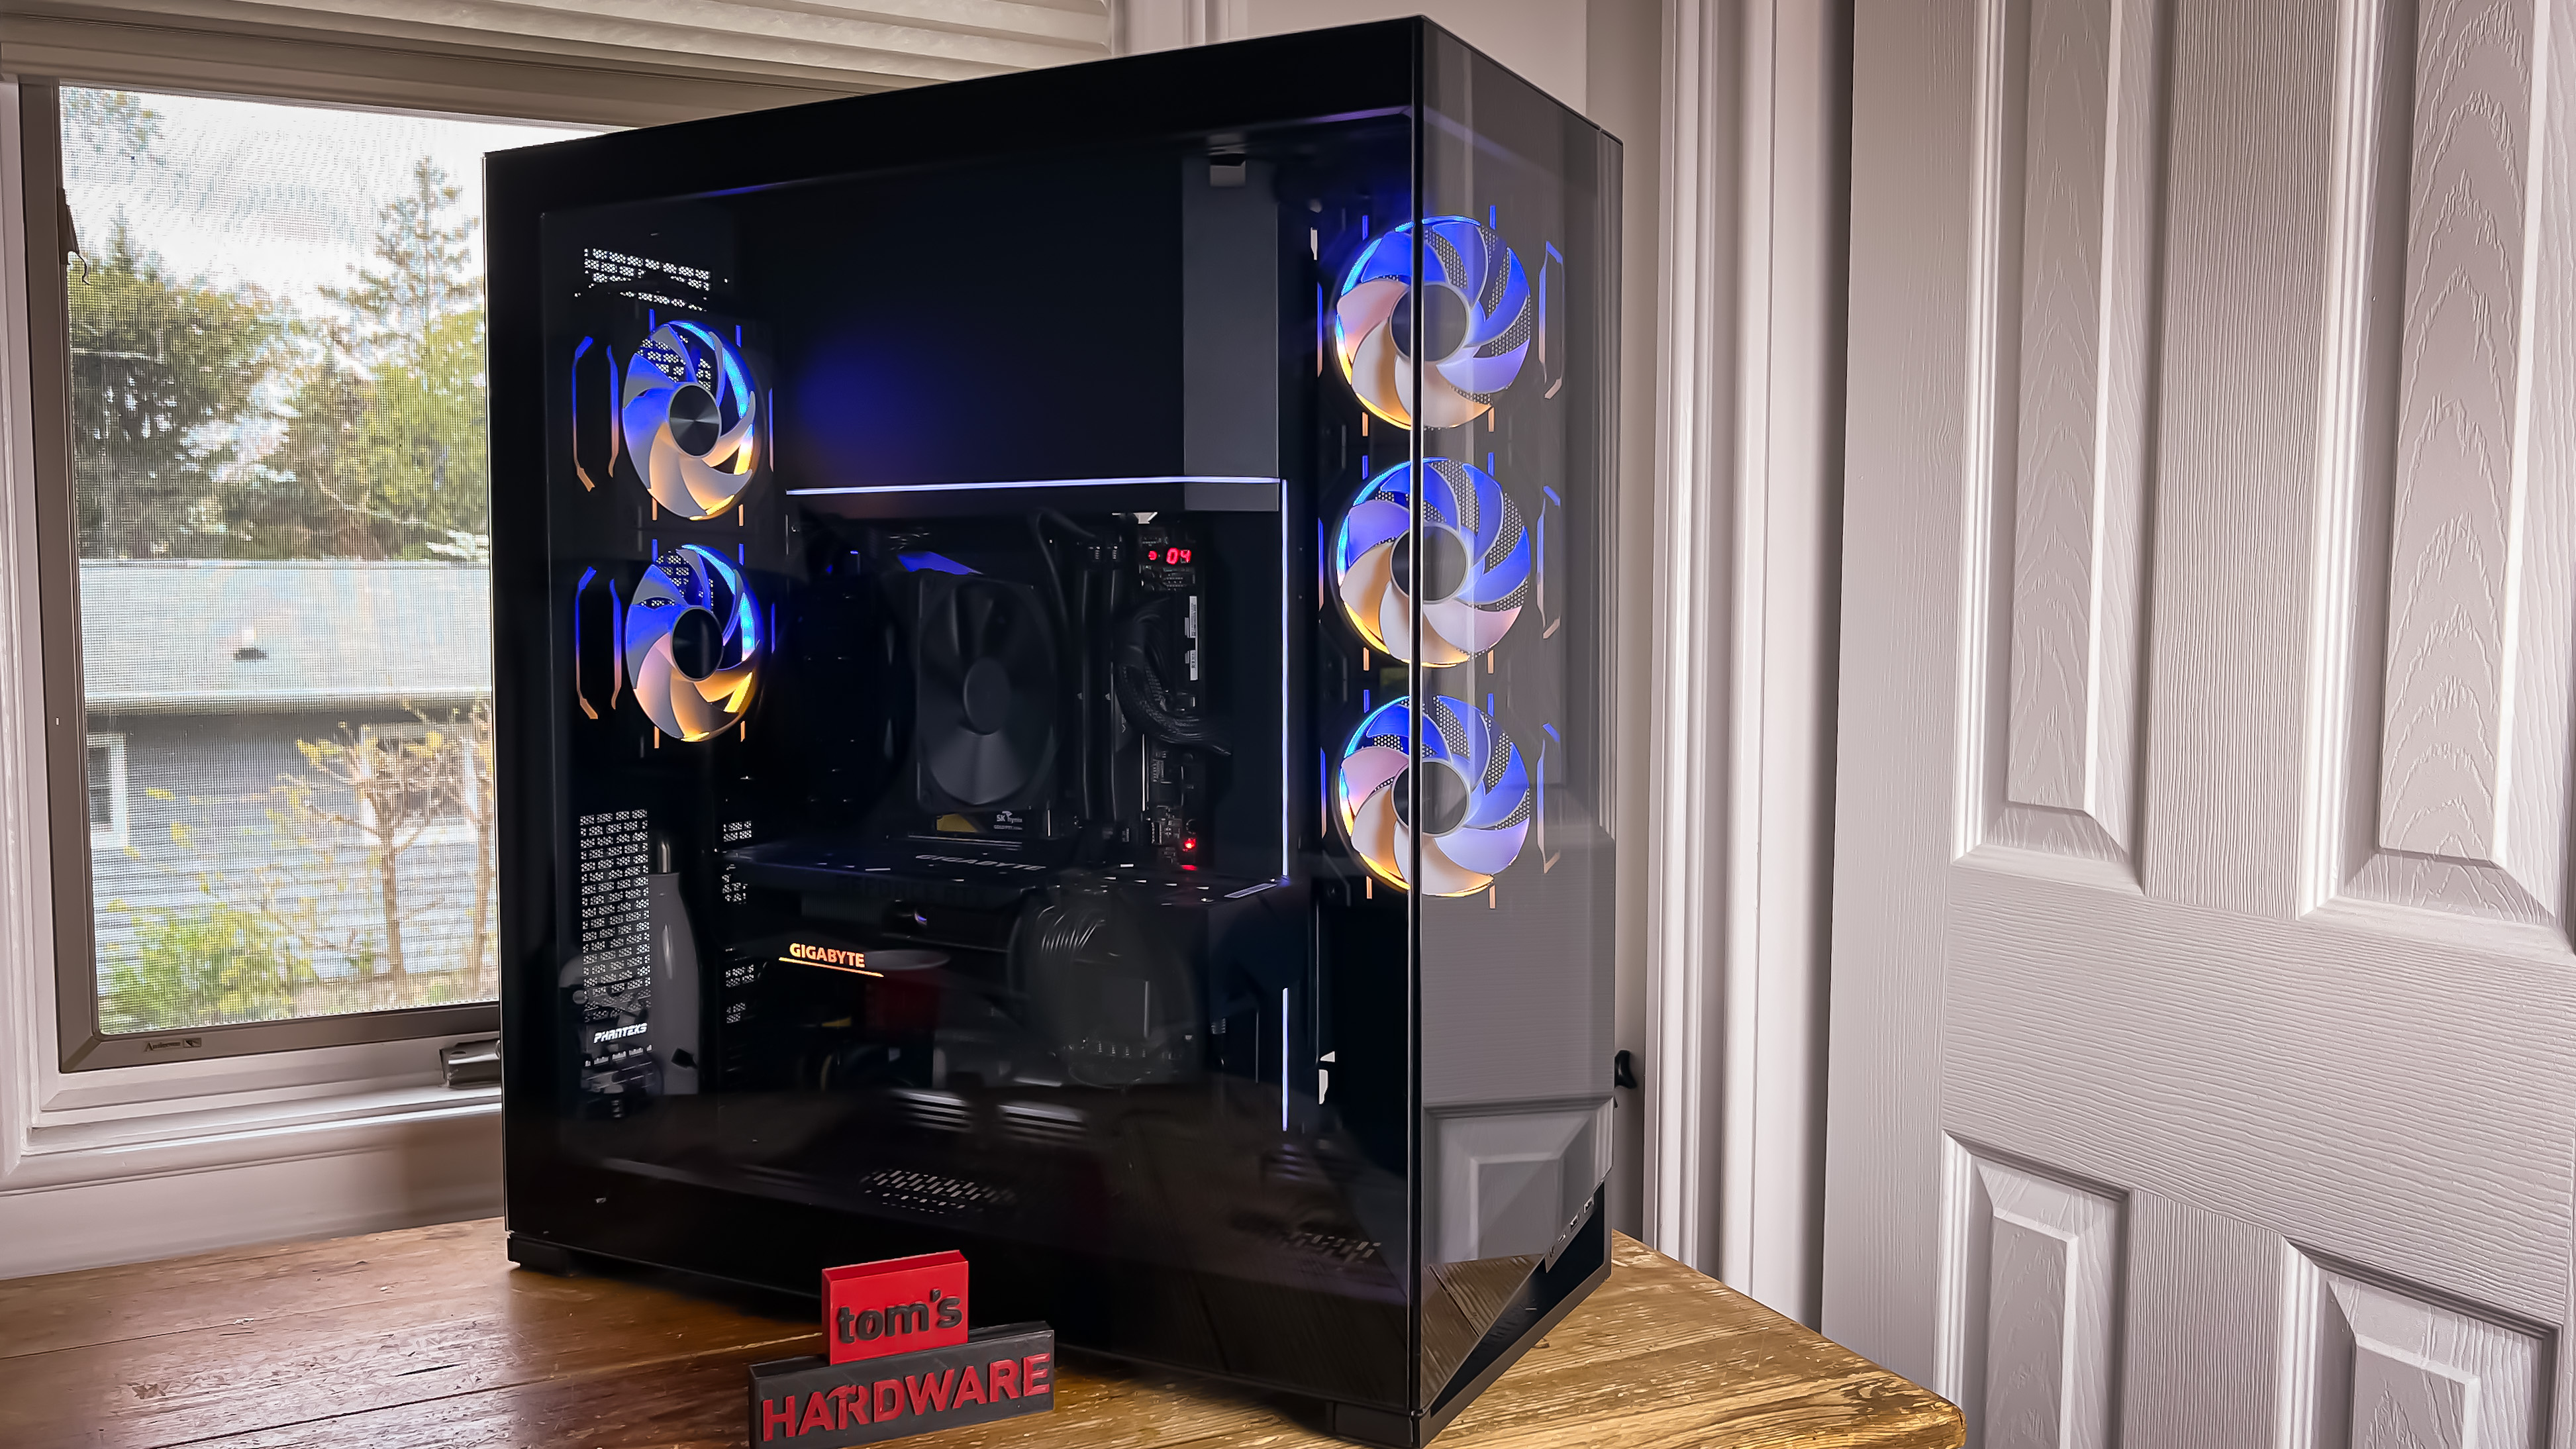 Phanteks - The new NV7 marks the beginning of a brand-new series of Phanteks  chassis. The NV Series envisions a chassis that supports the system  components aesthetically and with excellent cooling performance.